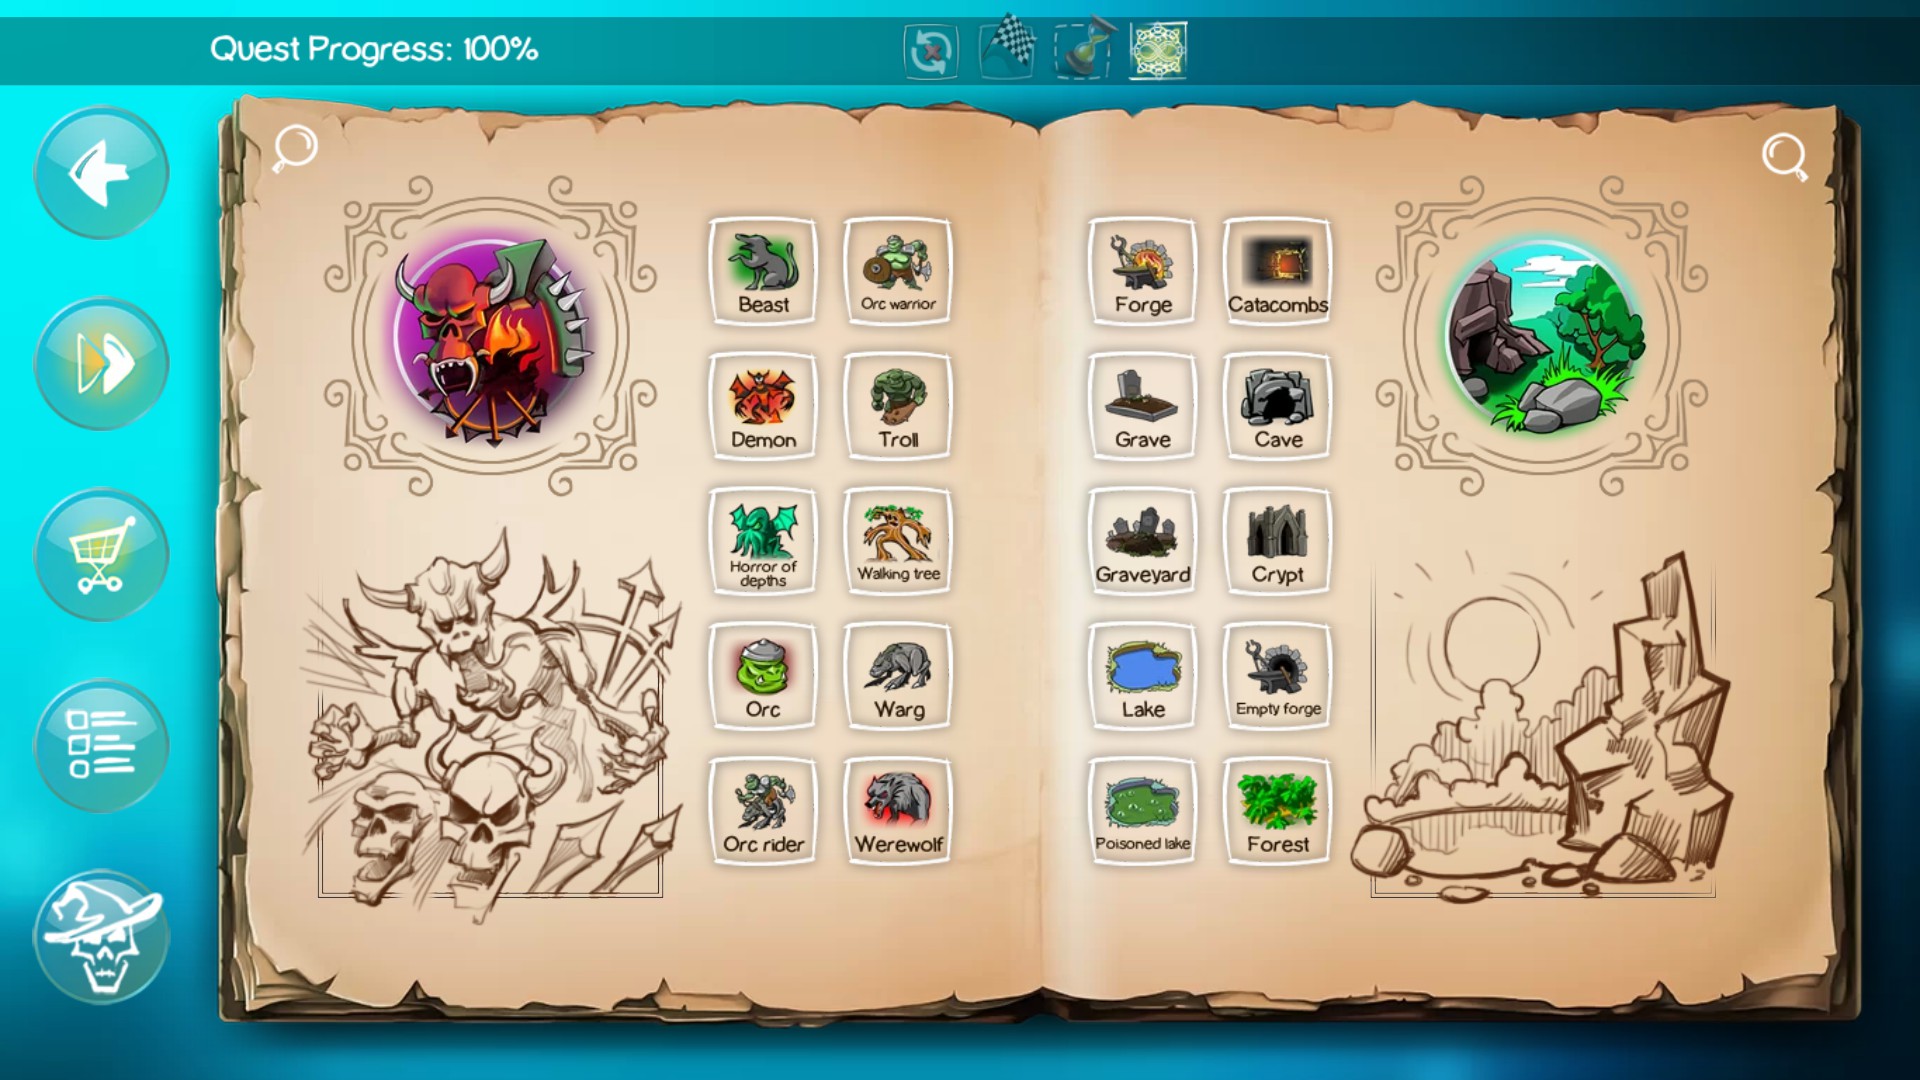 View all 5 high-quality Screenshots of the Doodle God Blitz app for Windows...